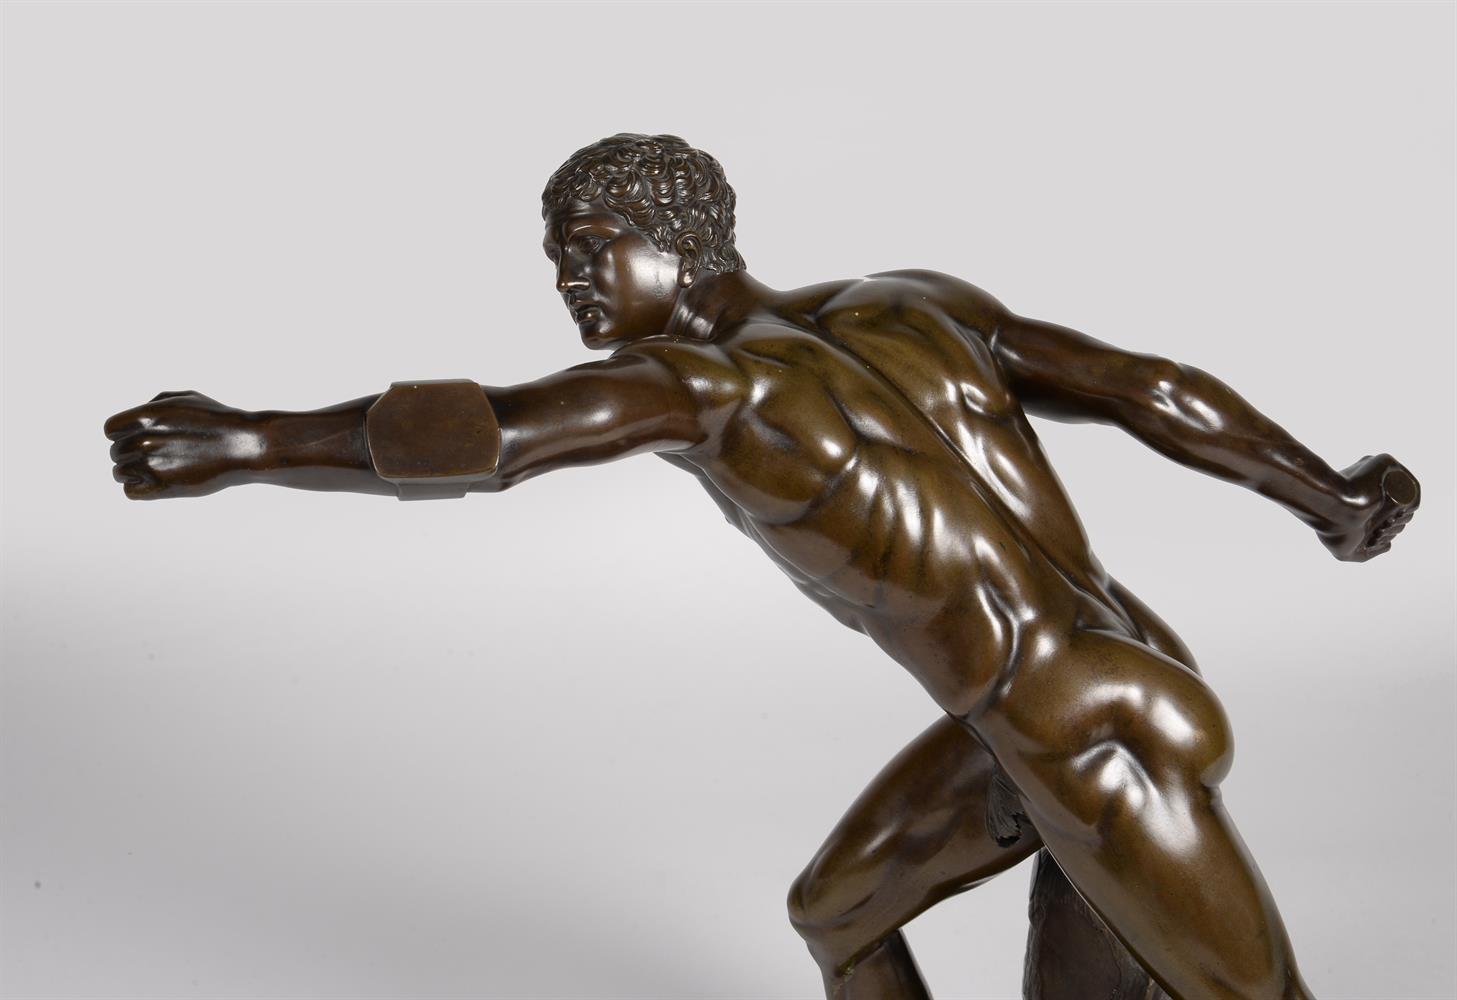 AFTER THE ANTIQUE, A BRONZE FIGURE 'THE BORGHESE GLADIATOR', MID-19TH CENTURY - Image 4 of 8